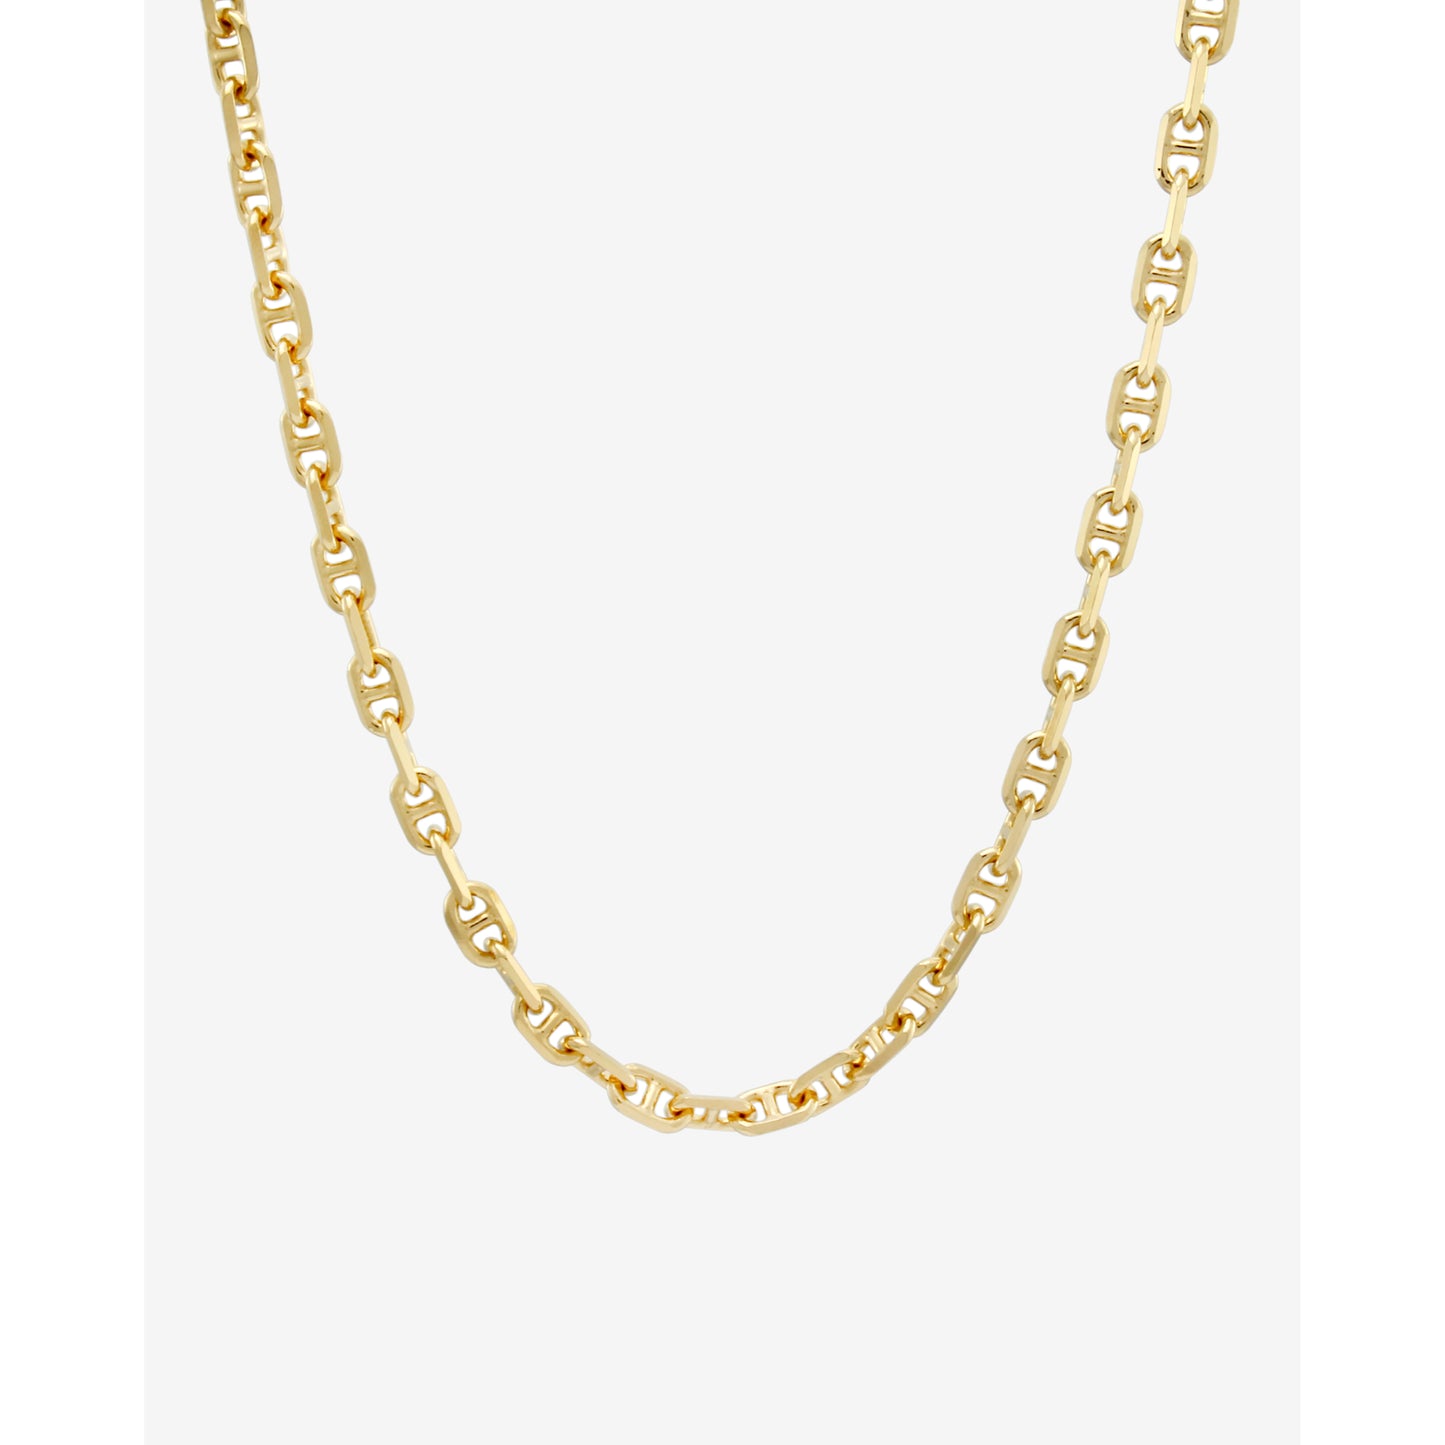 45cm Chunky Anchor Chain Necklace in Gold